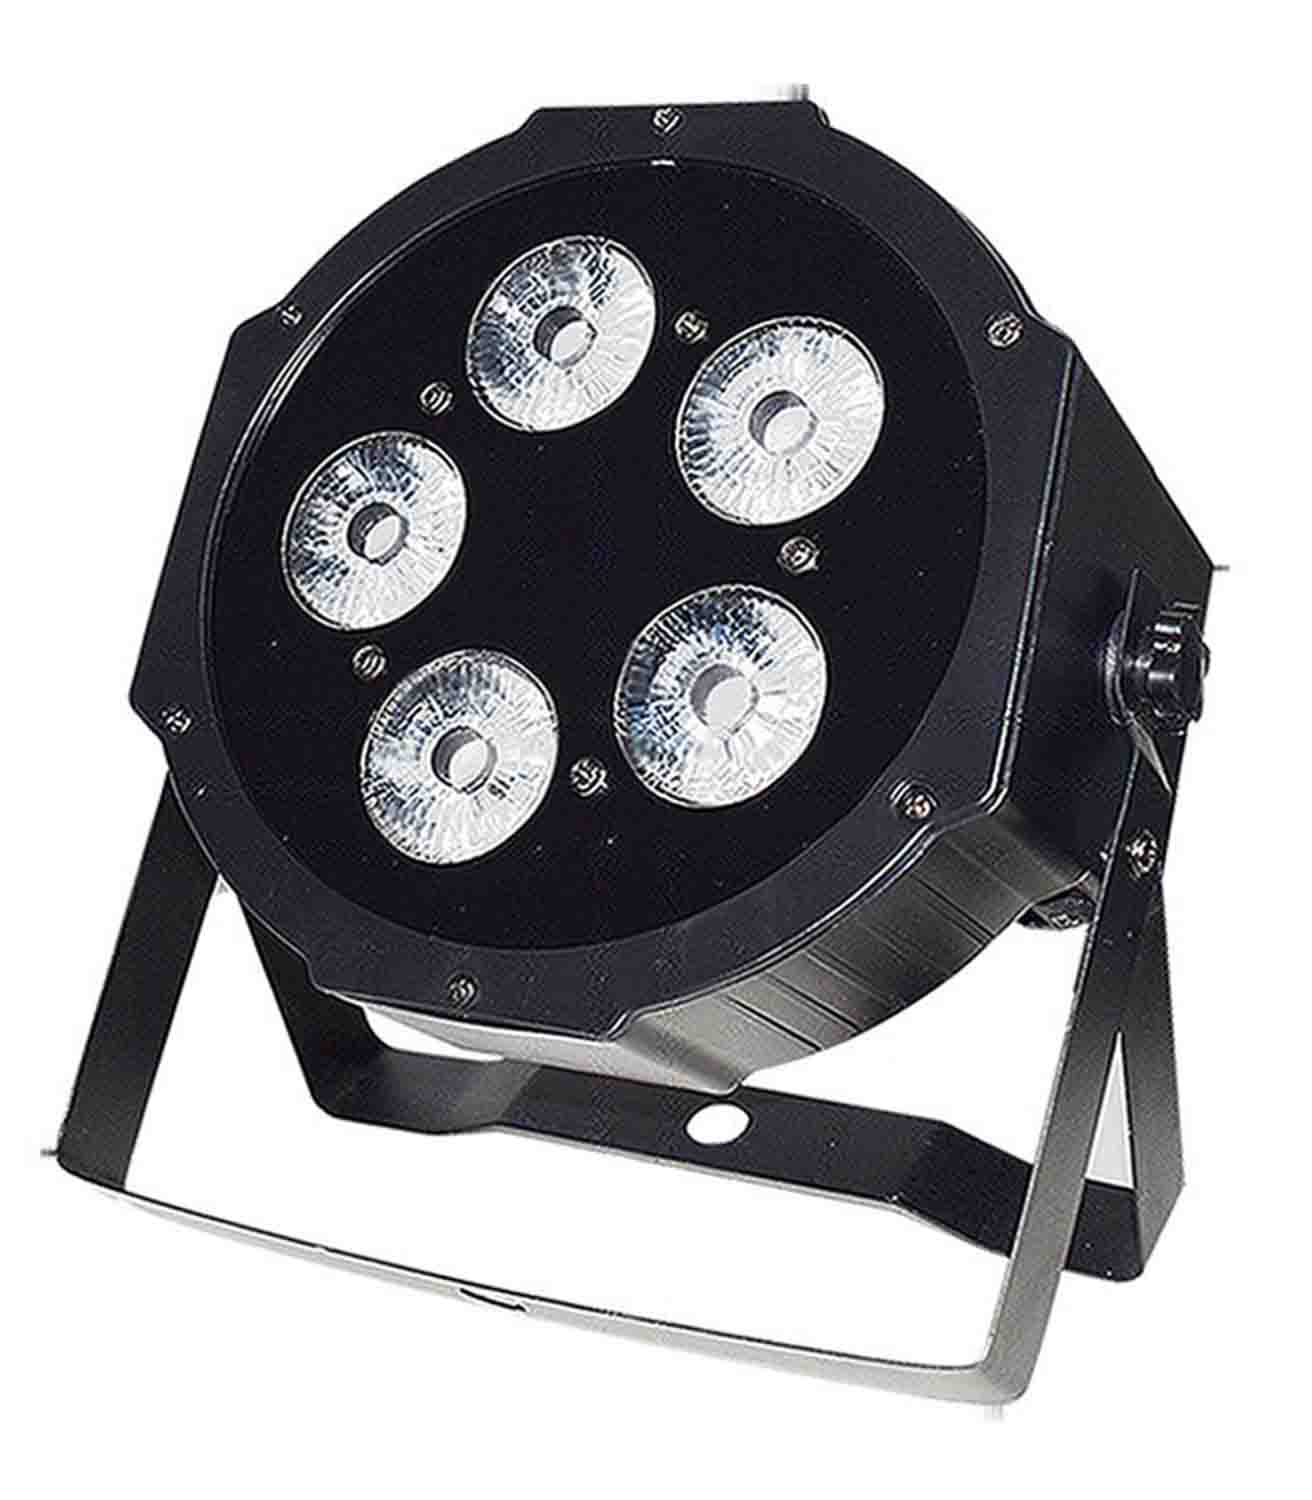 Colorkey CKU-2152 WaferPar HEX 5 MKII Low Profile Wash Light with High Output 6 in 1 Color (RGBAW-UV) LEDs - Hollywood DJ